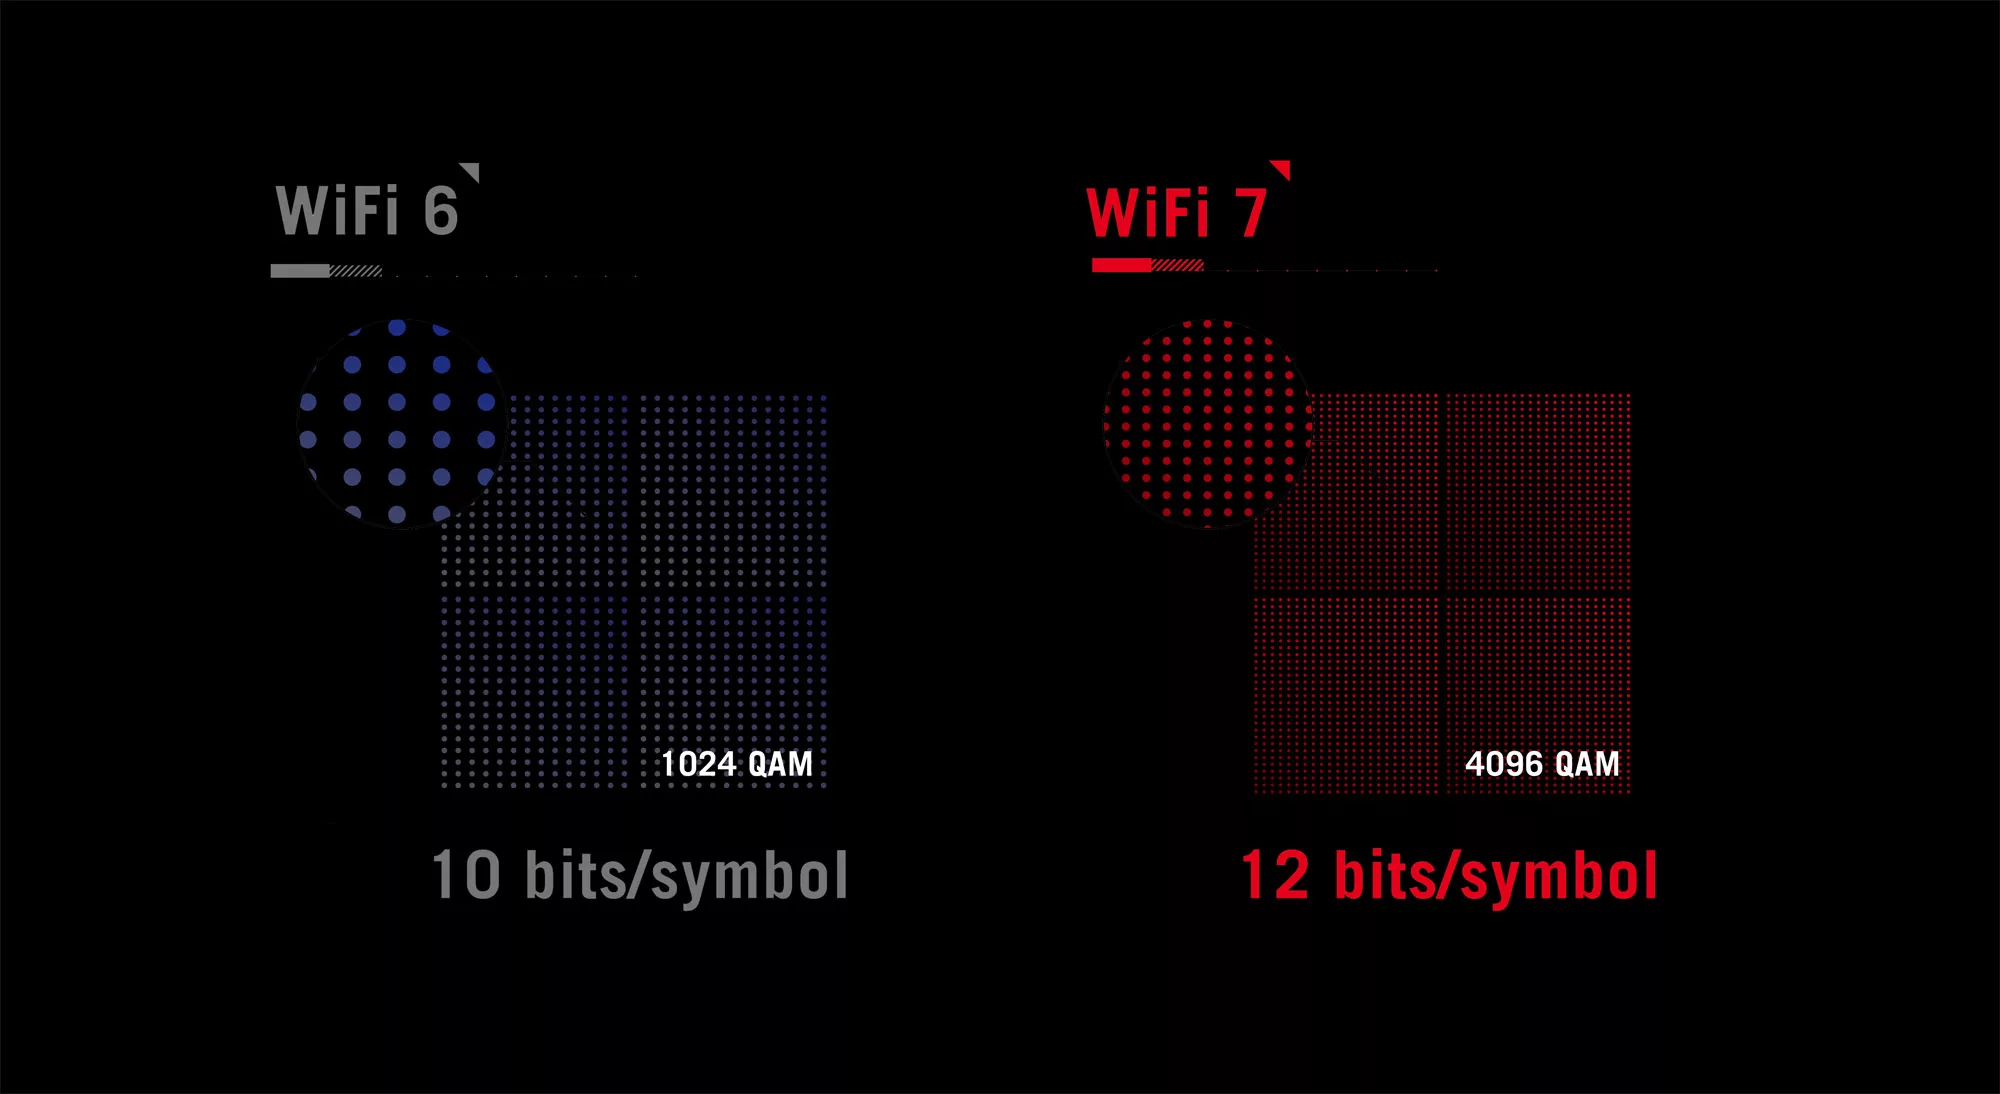 A diagram showing how WiFi 7 carries more bits per symbol than WiFi 6